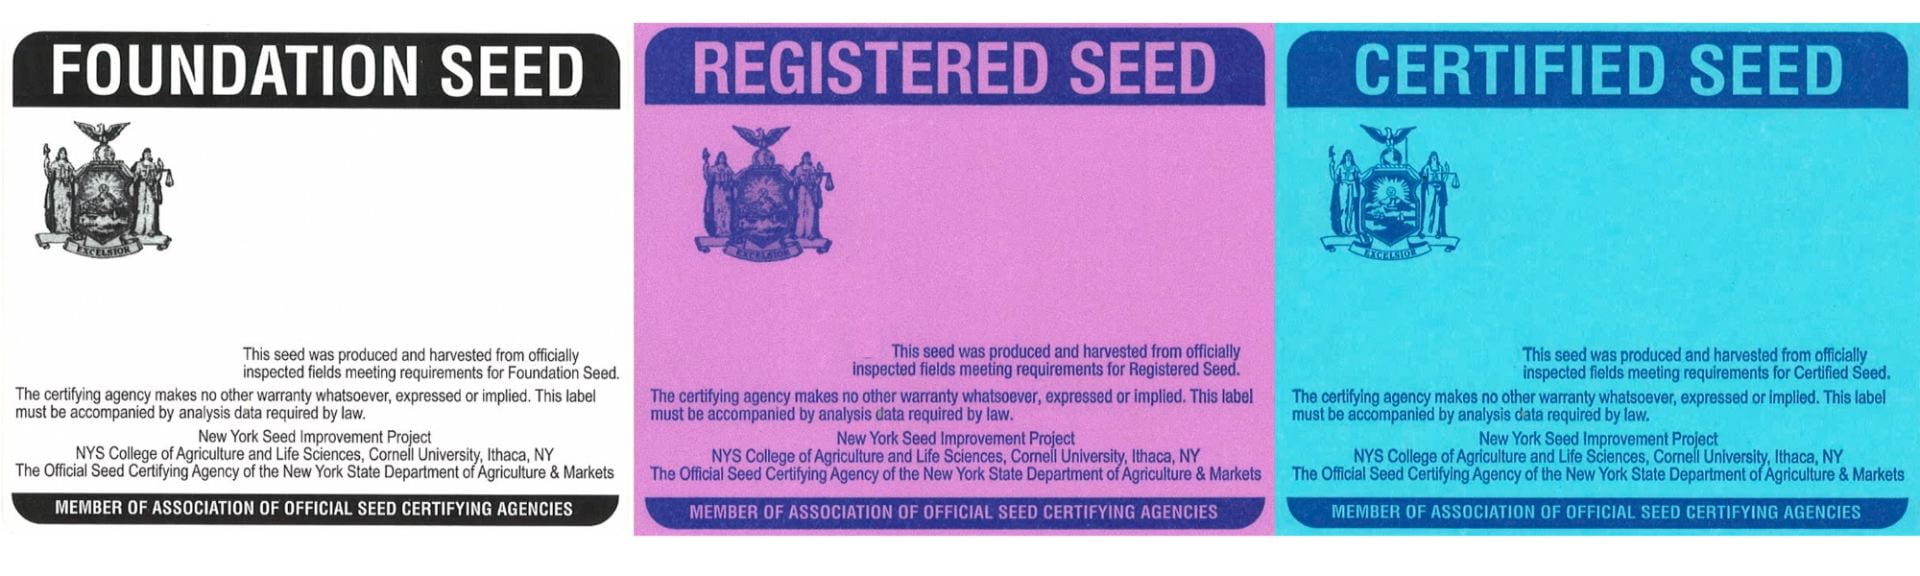 NY State Foundation, Registered and Certified tags